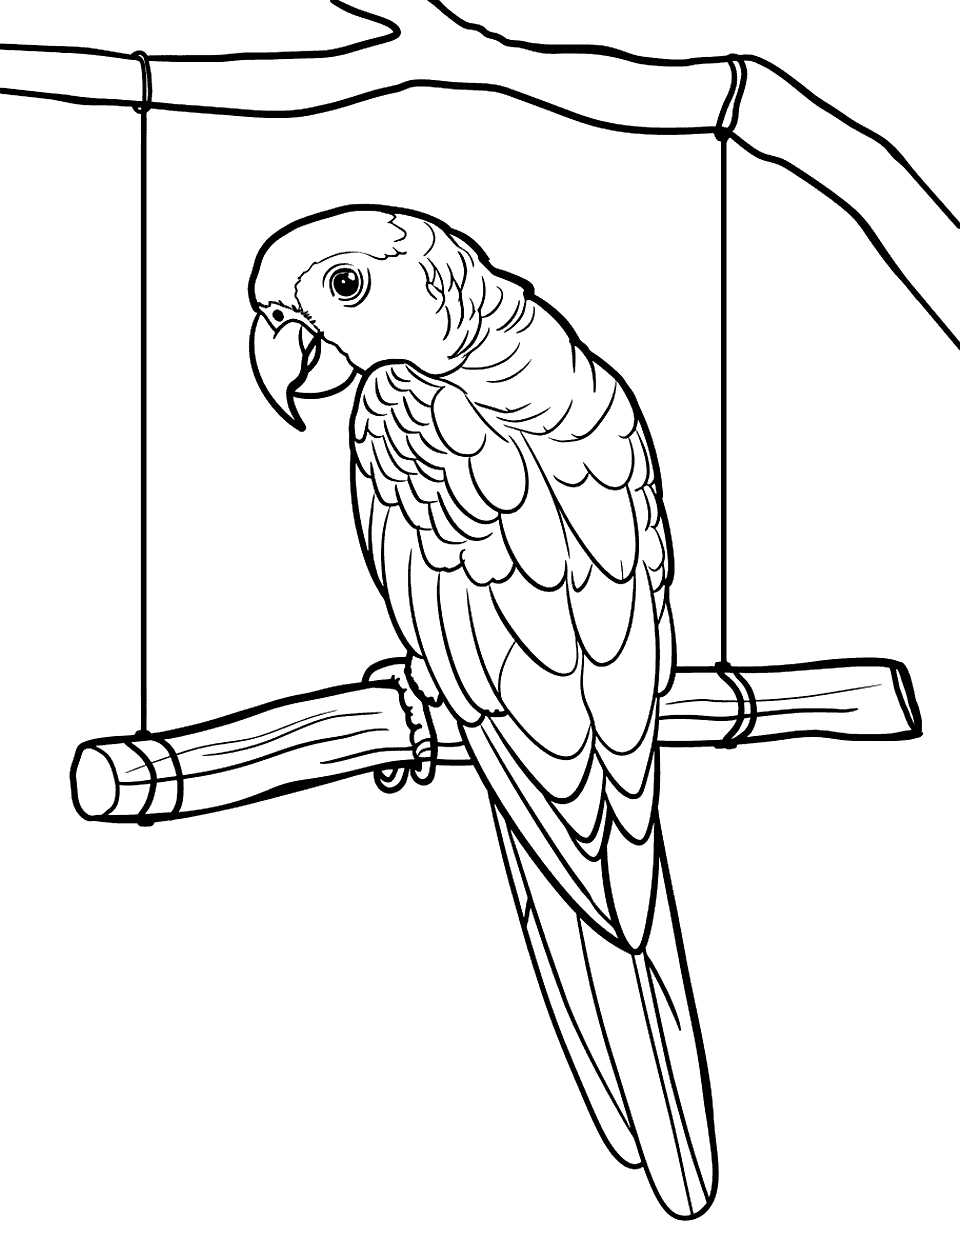 African Grey on a Swing Parrot Coloring Page - An African grey parrot sitting on a wooden swing attached to a simple tree branch.